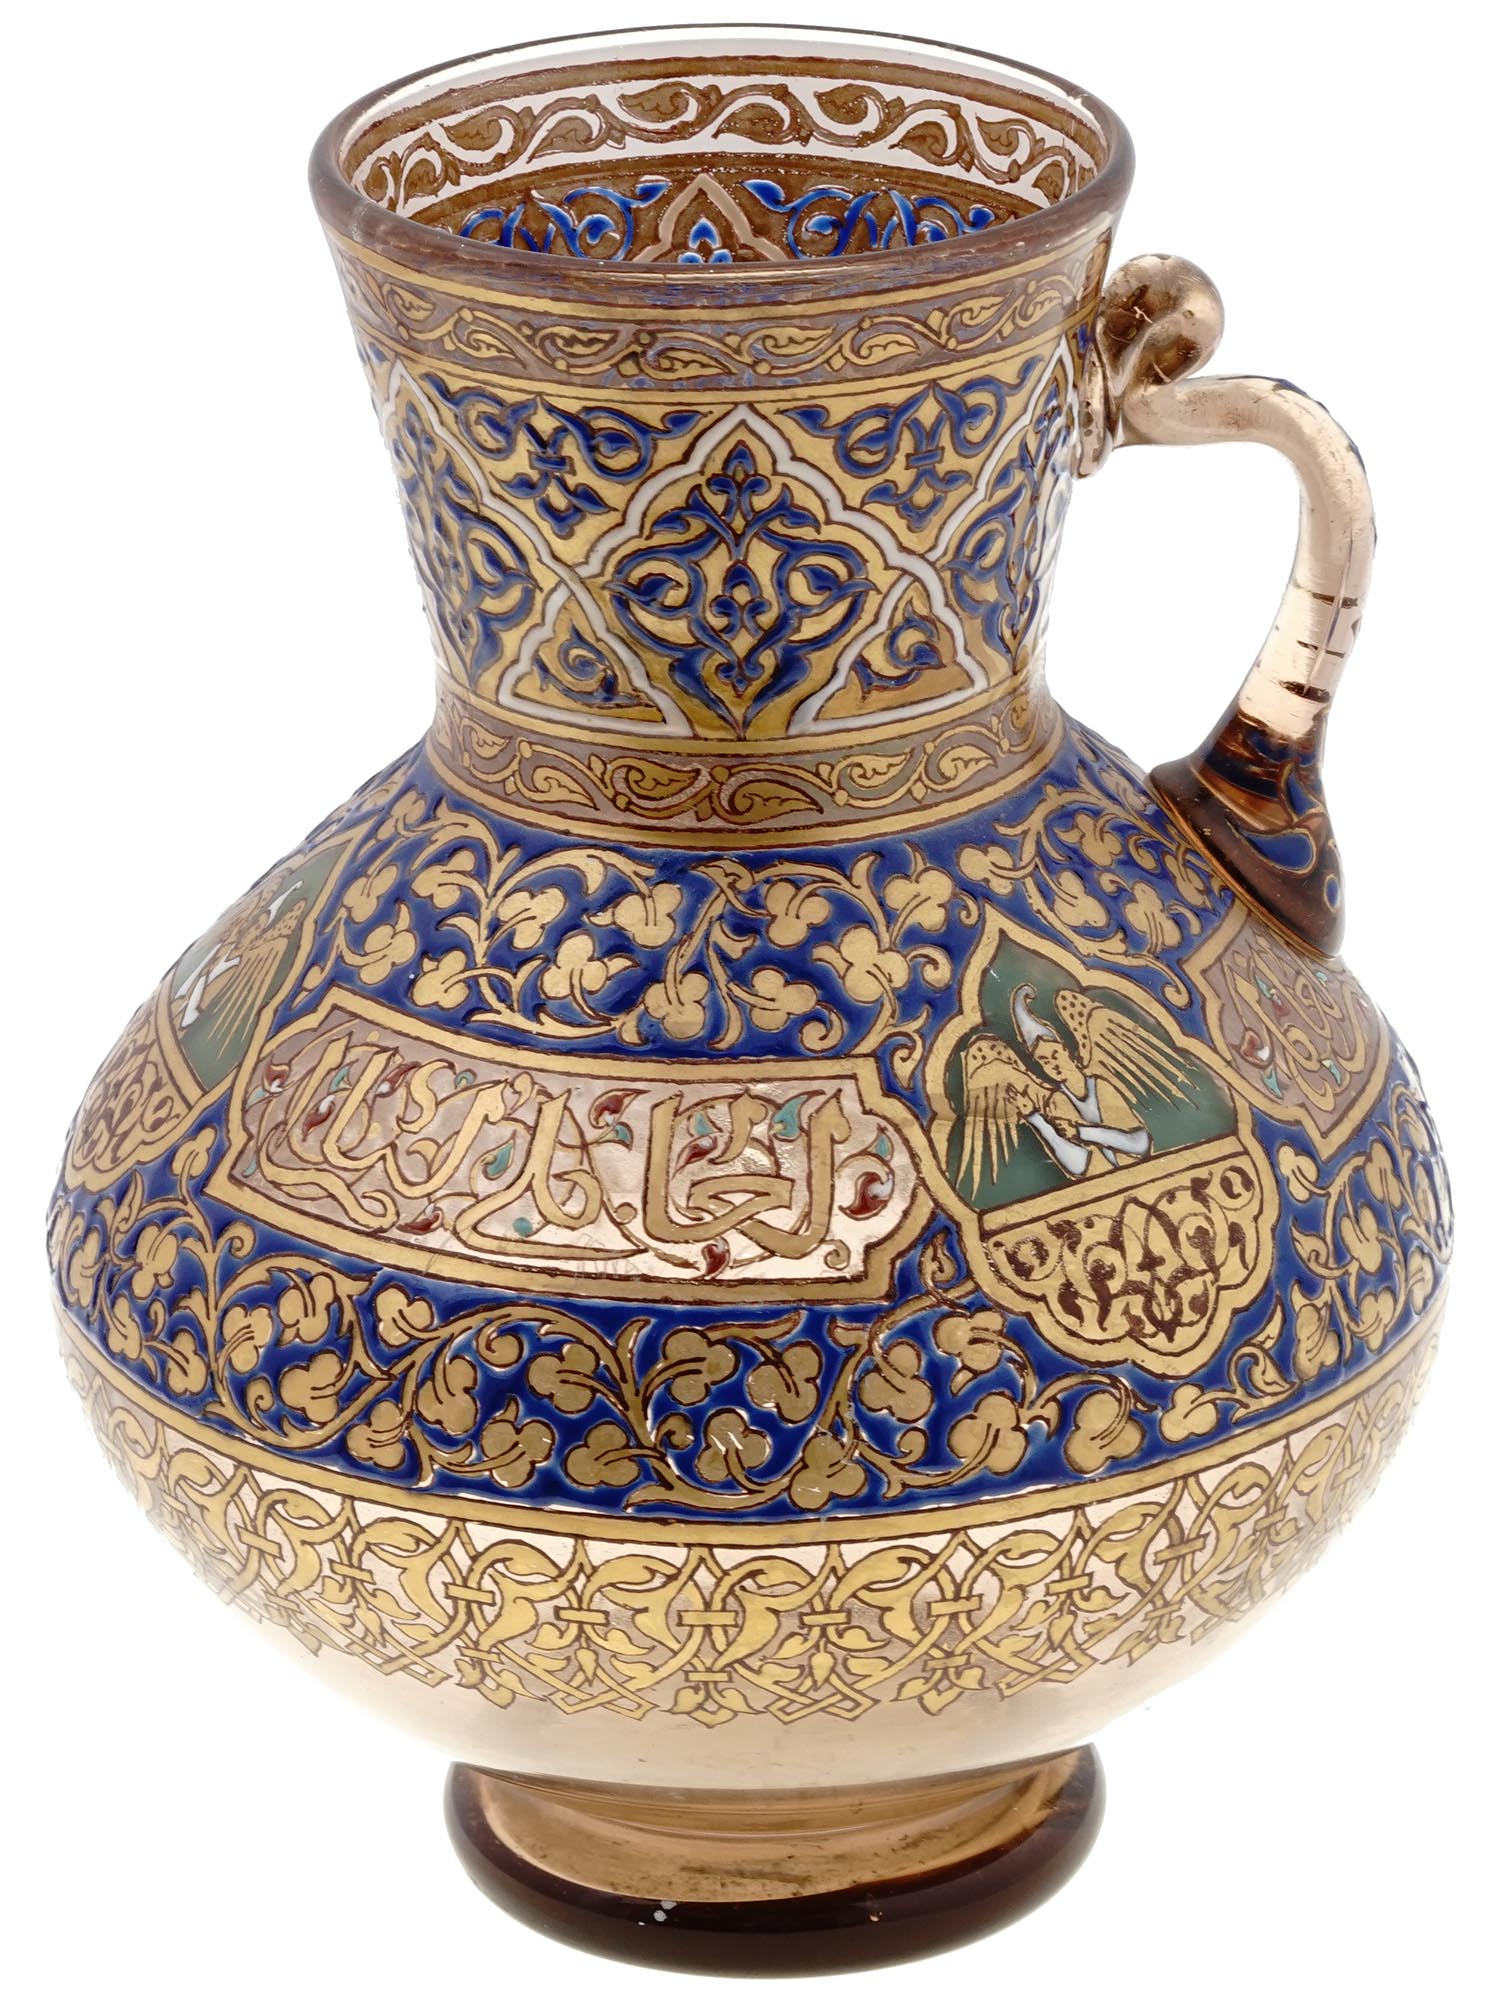 ANTIQUE MAMLUK REVIVAL MOSQUE LAMP BY BROCARD PIC-0